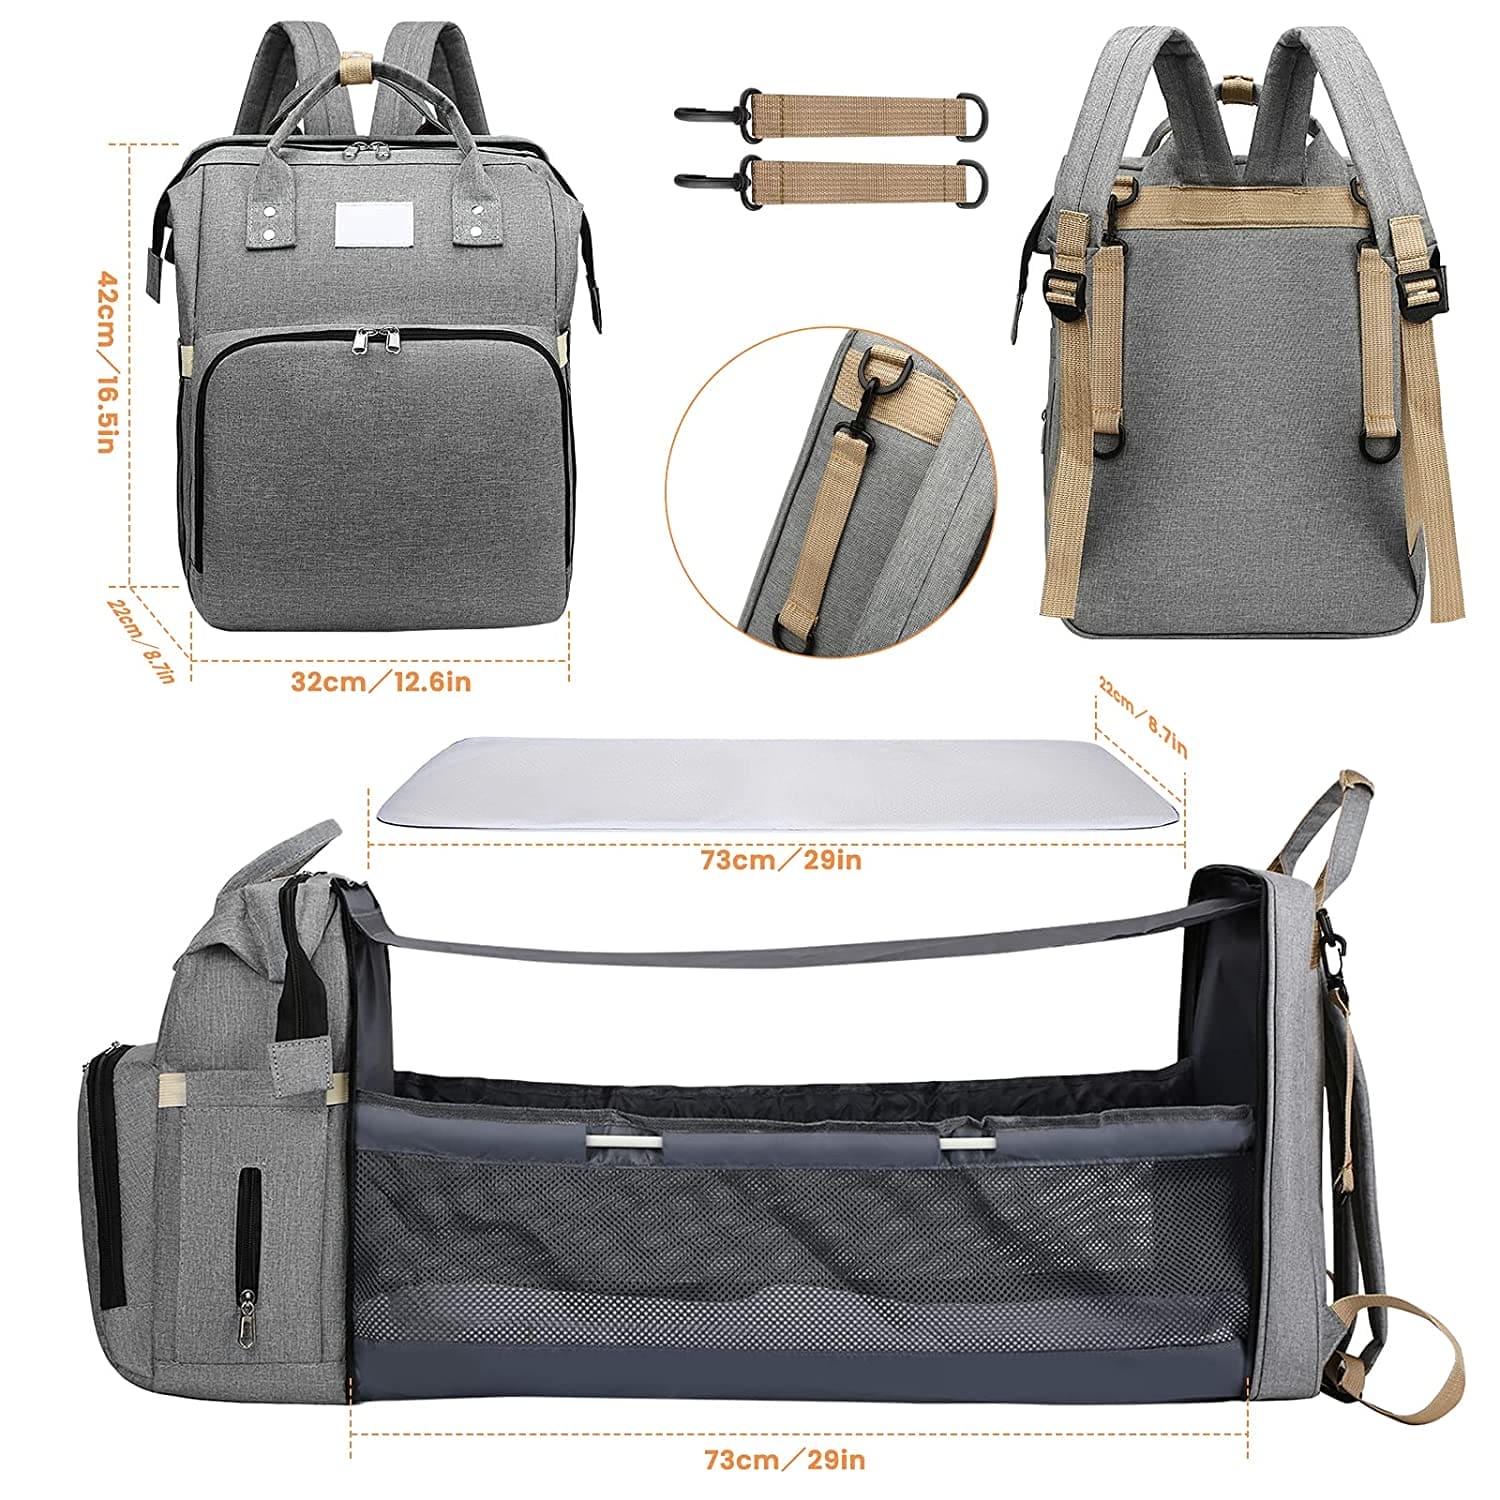 Your Baby's Dream Haven: The Ultimate Portable Bed & Diaper Bag Combo! - The Little Big Store